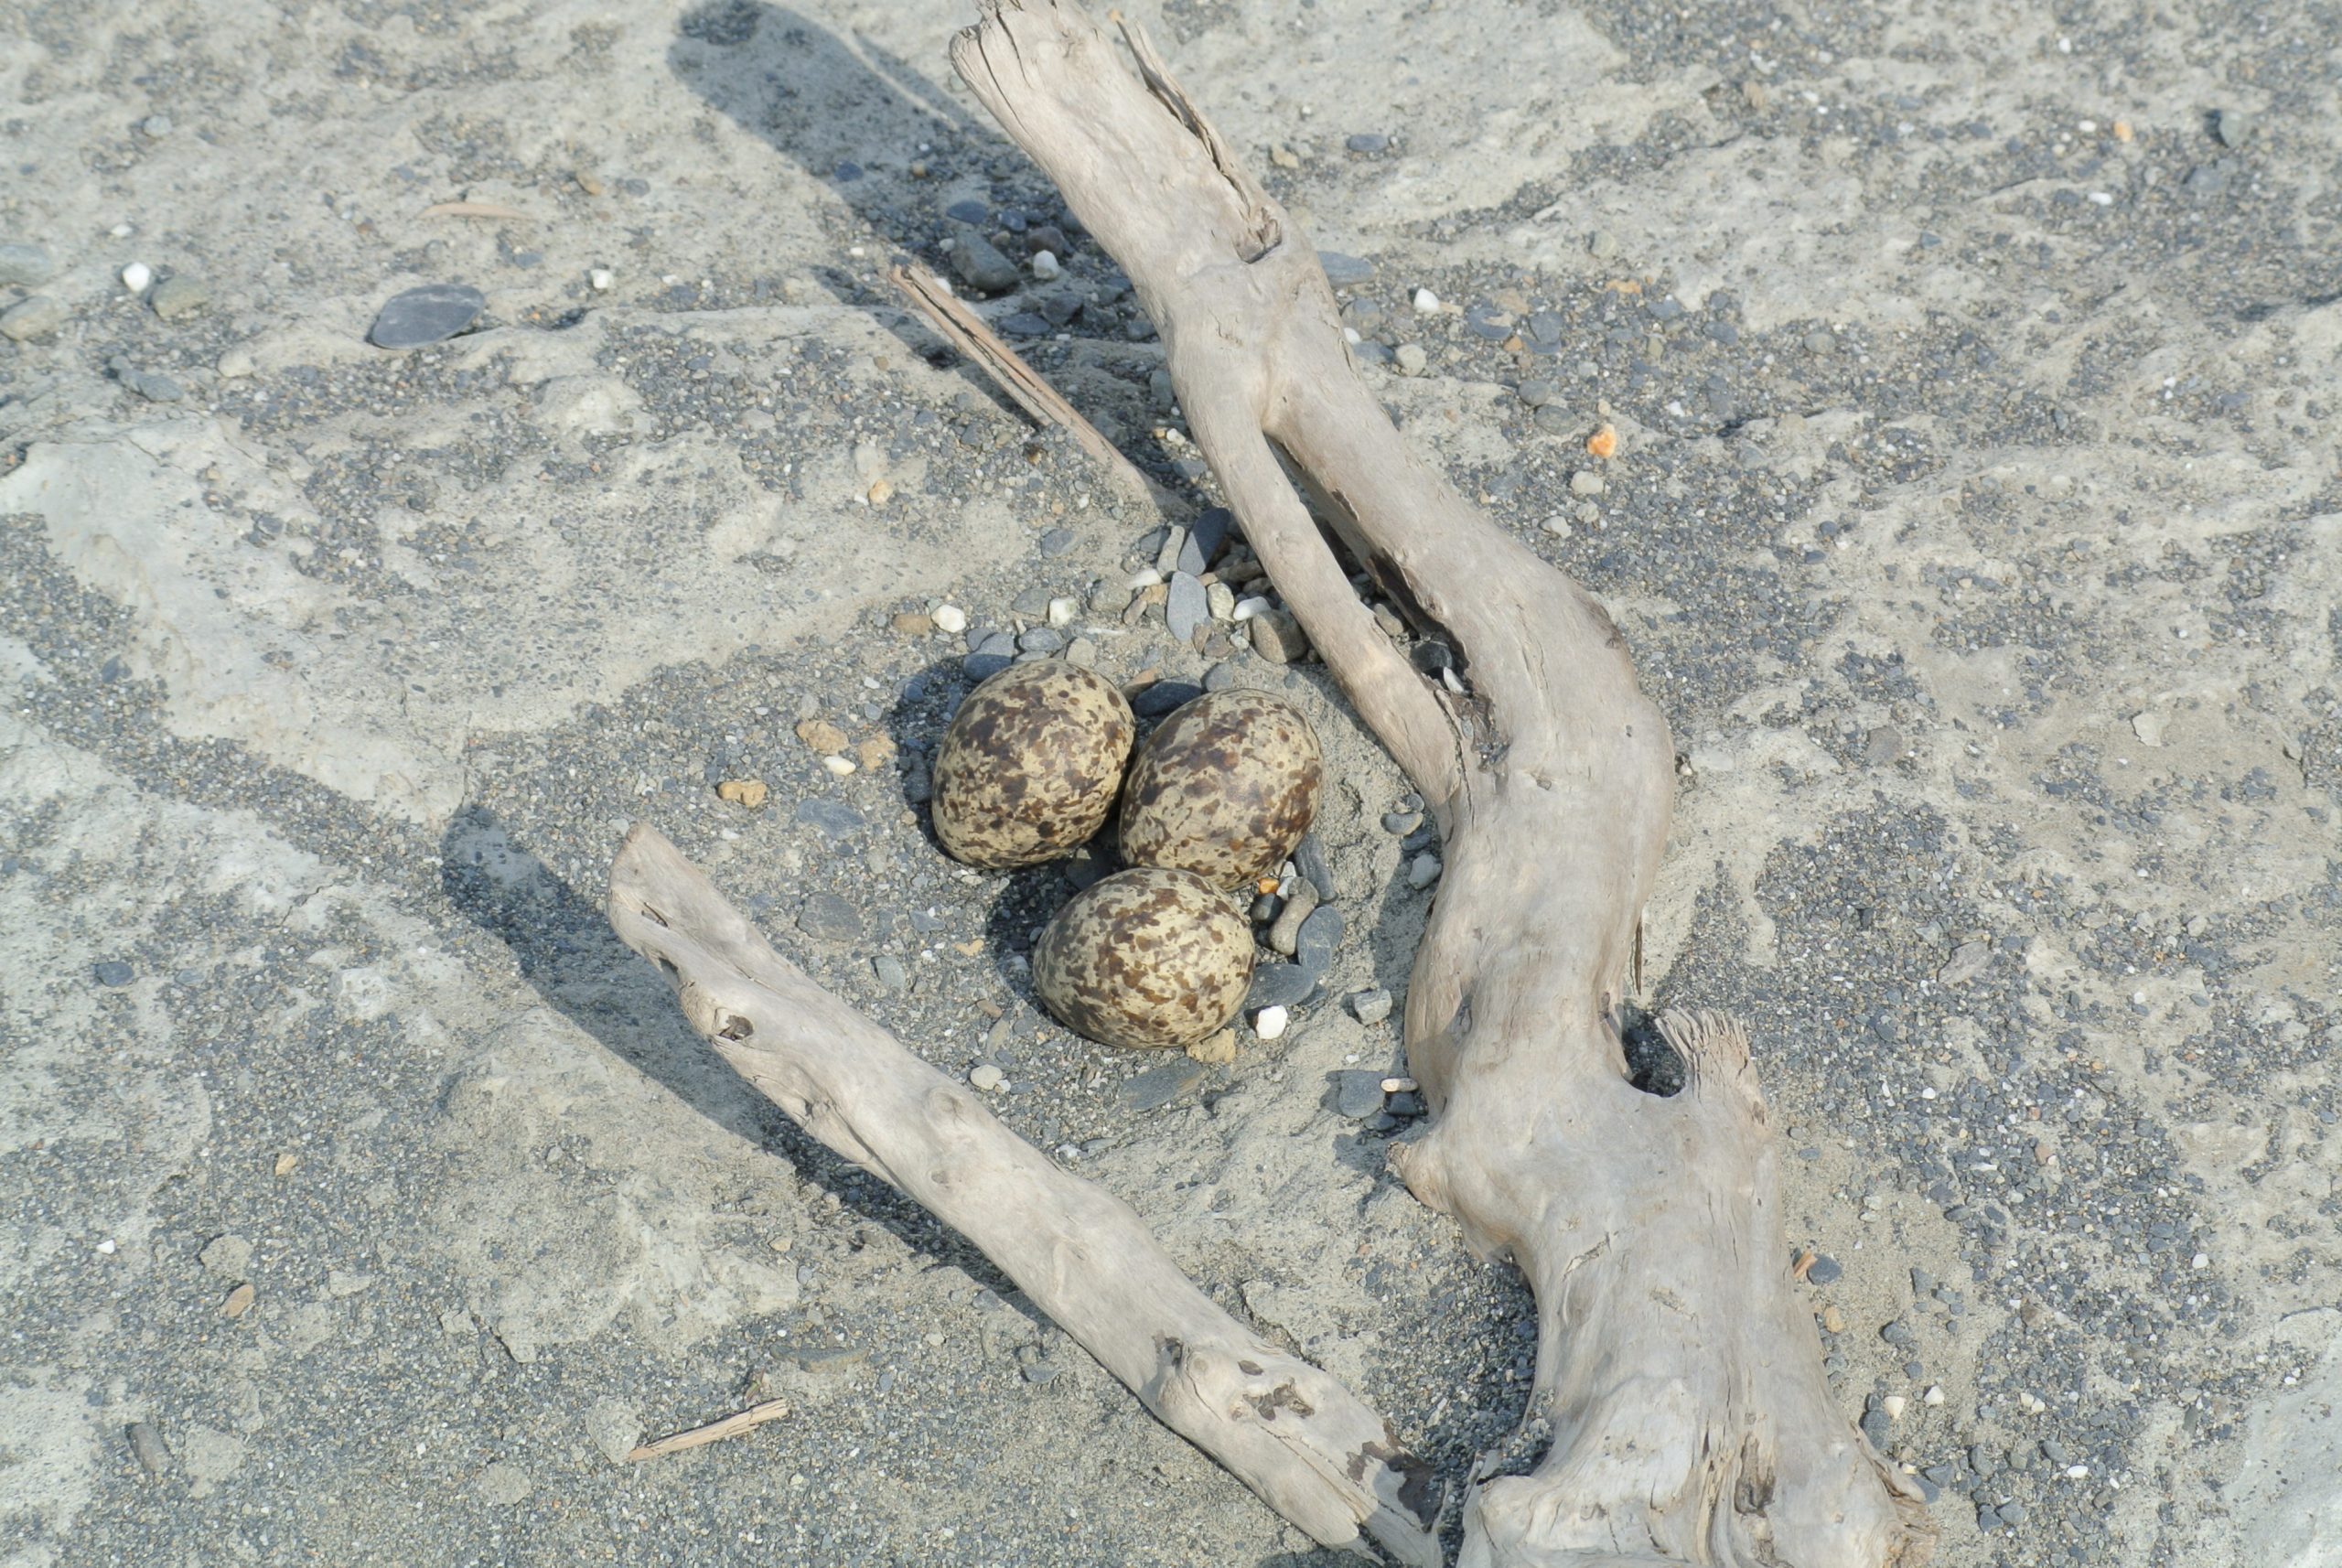 Oriental Pratincole nest and eggs (2) © ChungYu Chiang